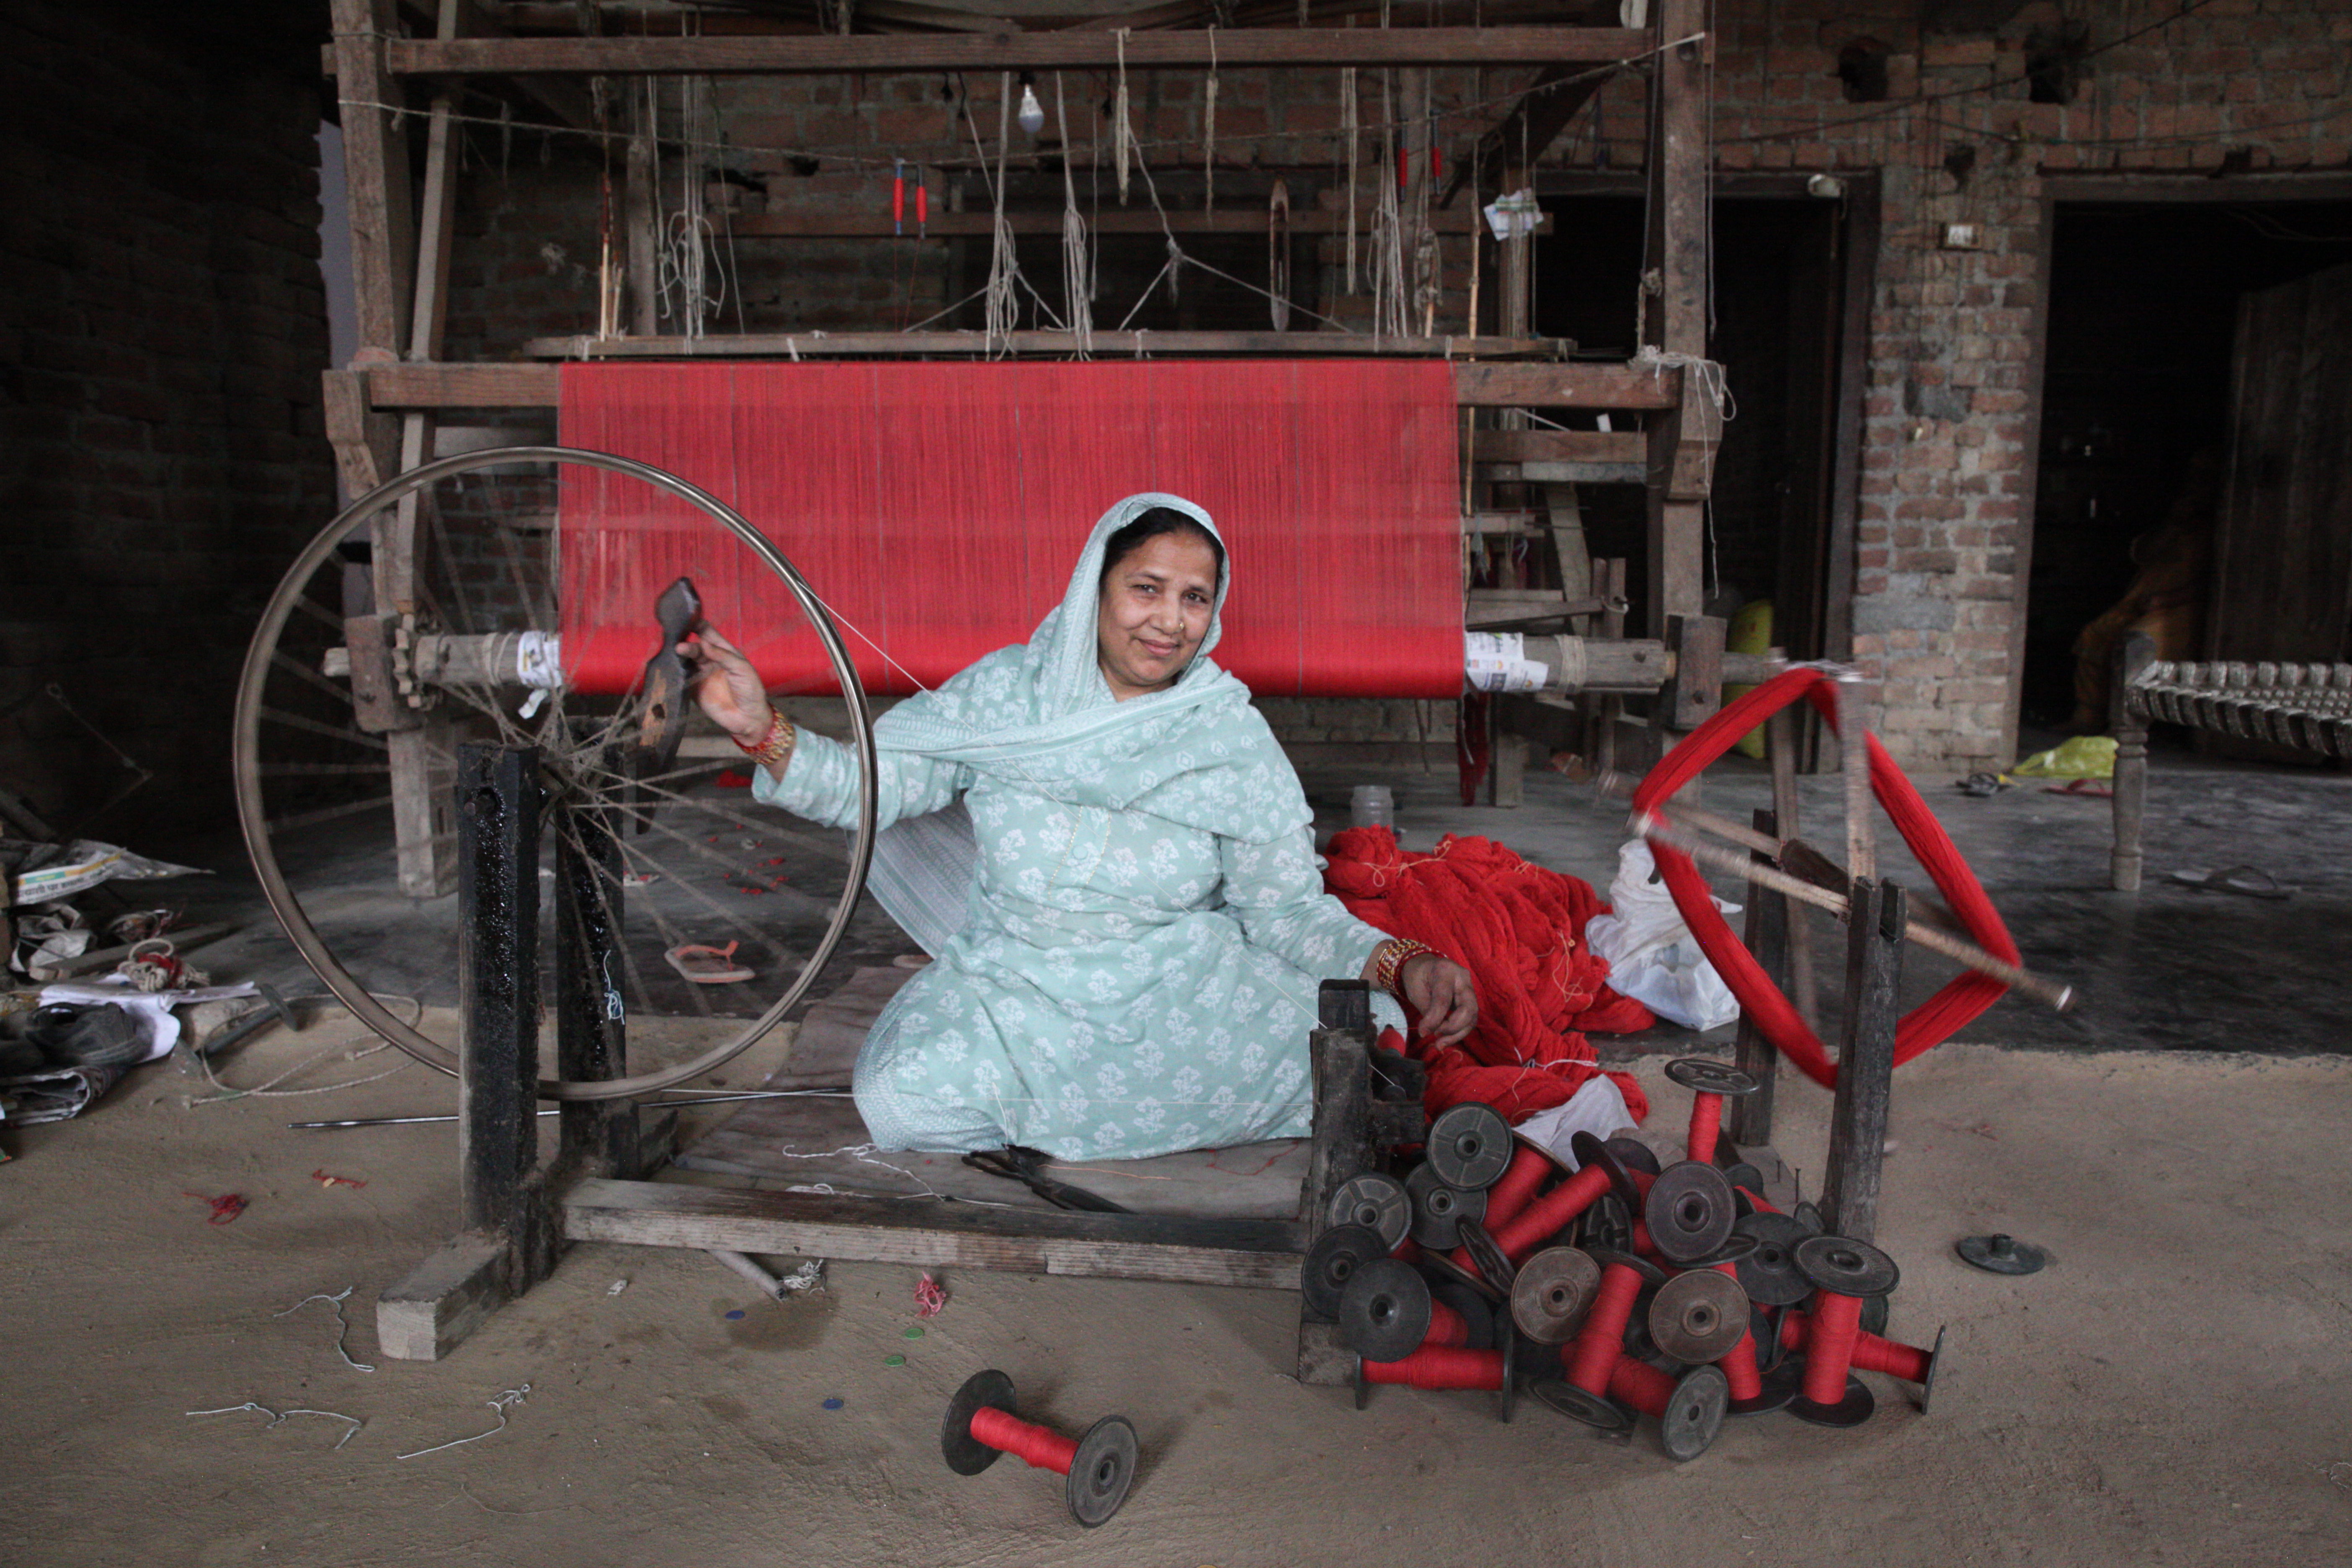 Fatima's family has been in the handloom business since generations